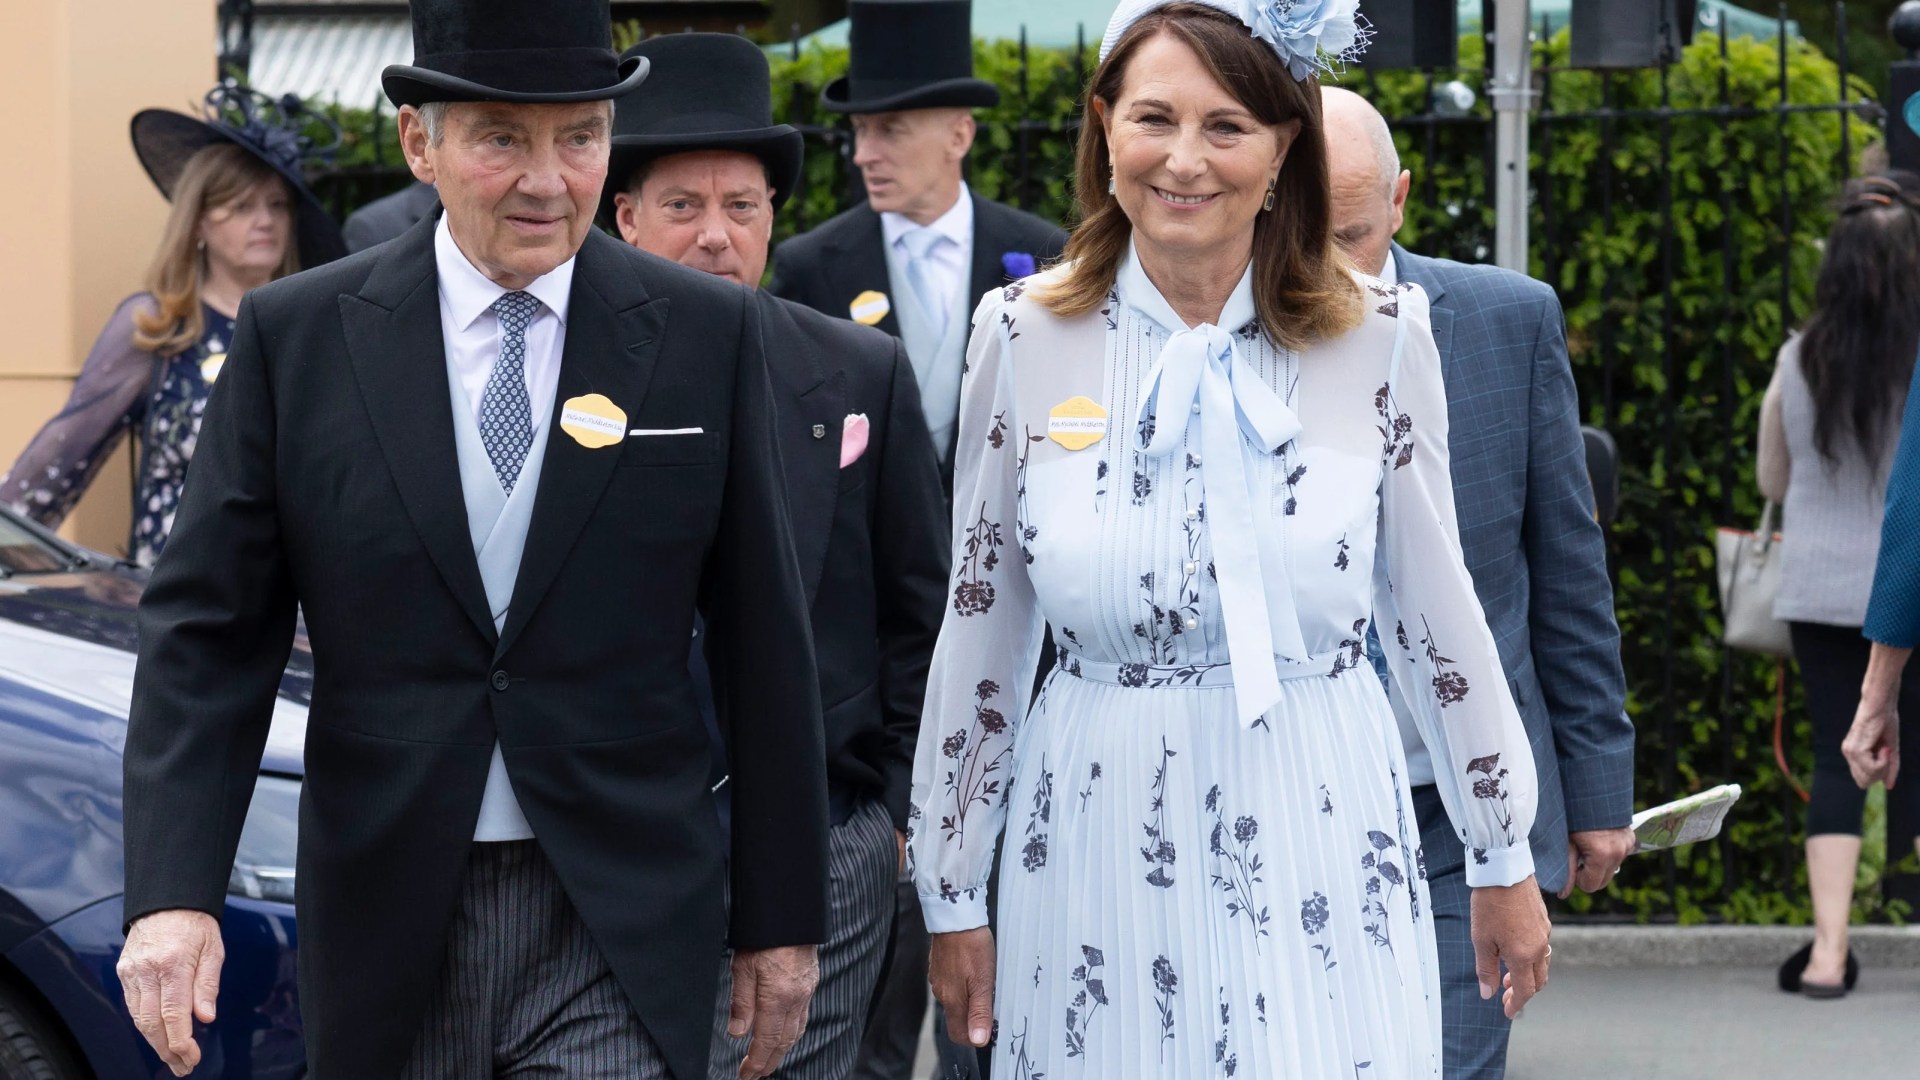 Princess Kates parents Carole and Michael make their first public appearance since daughter’s cancer diagnosis [Video]